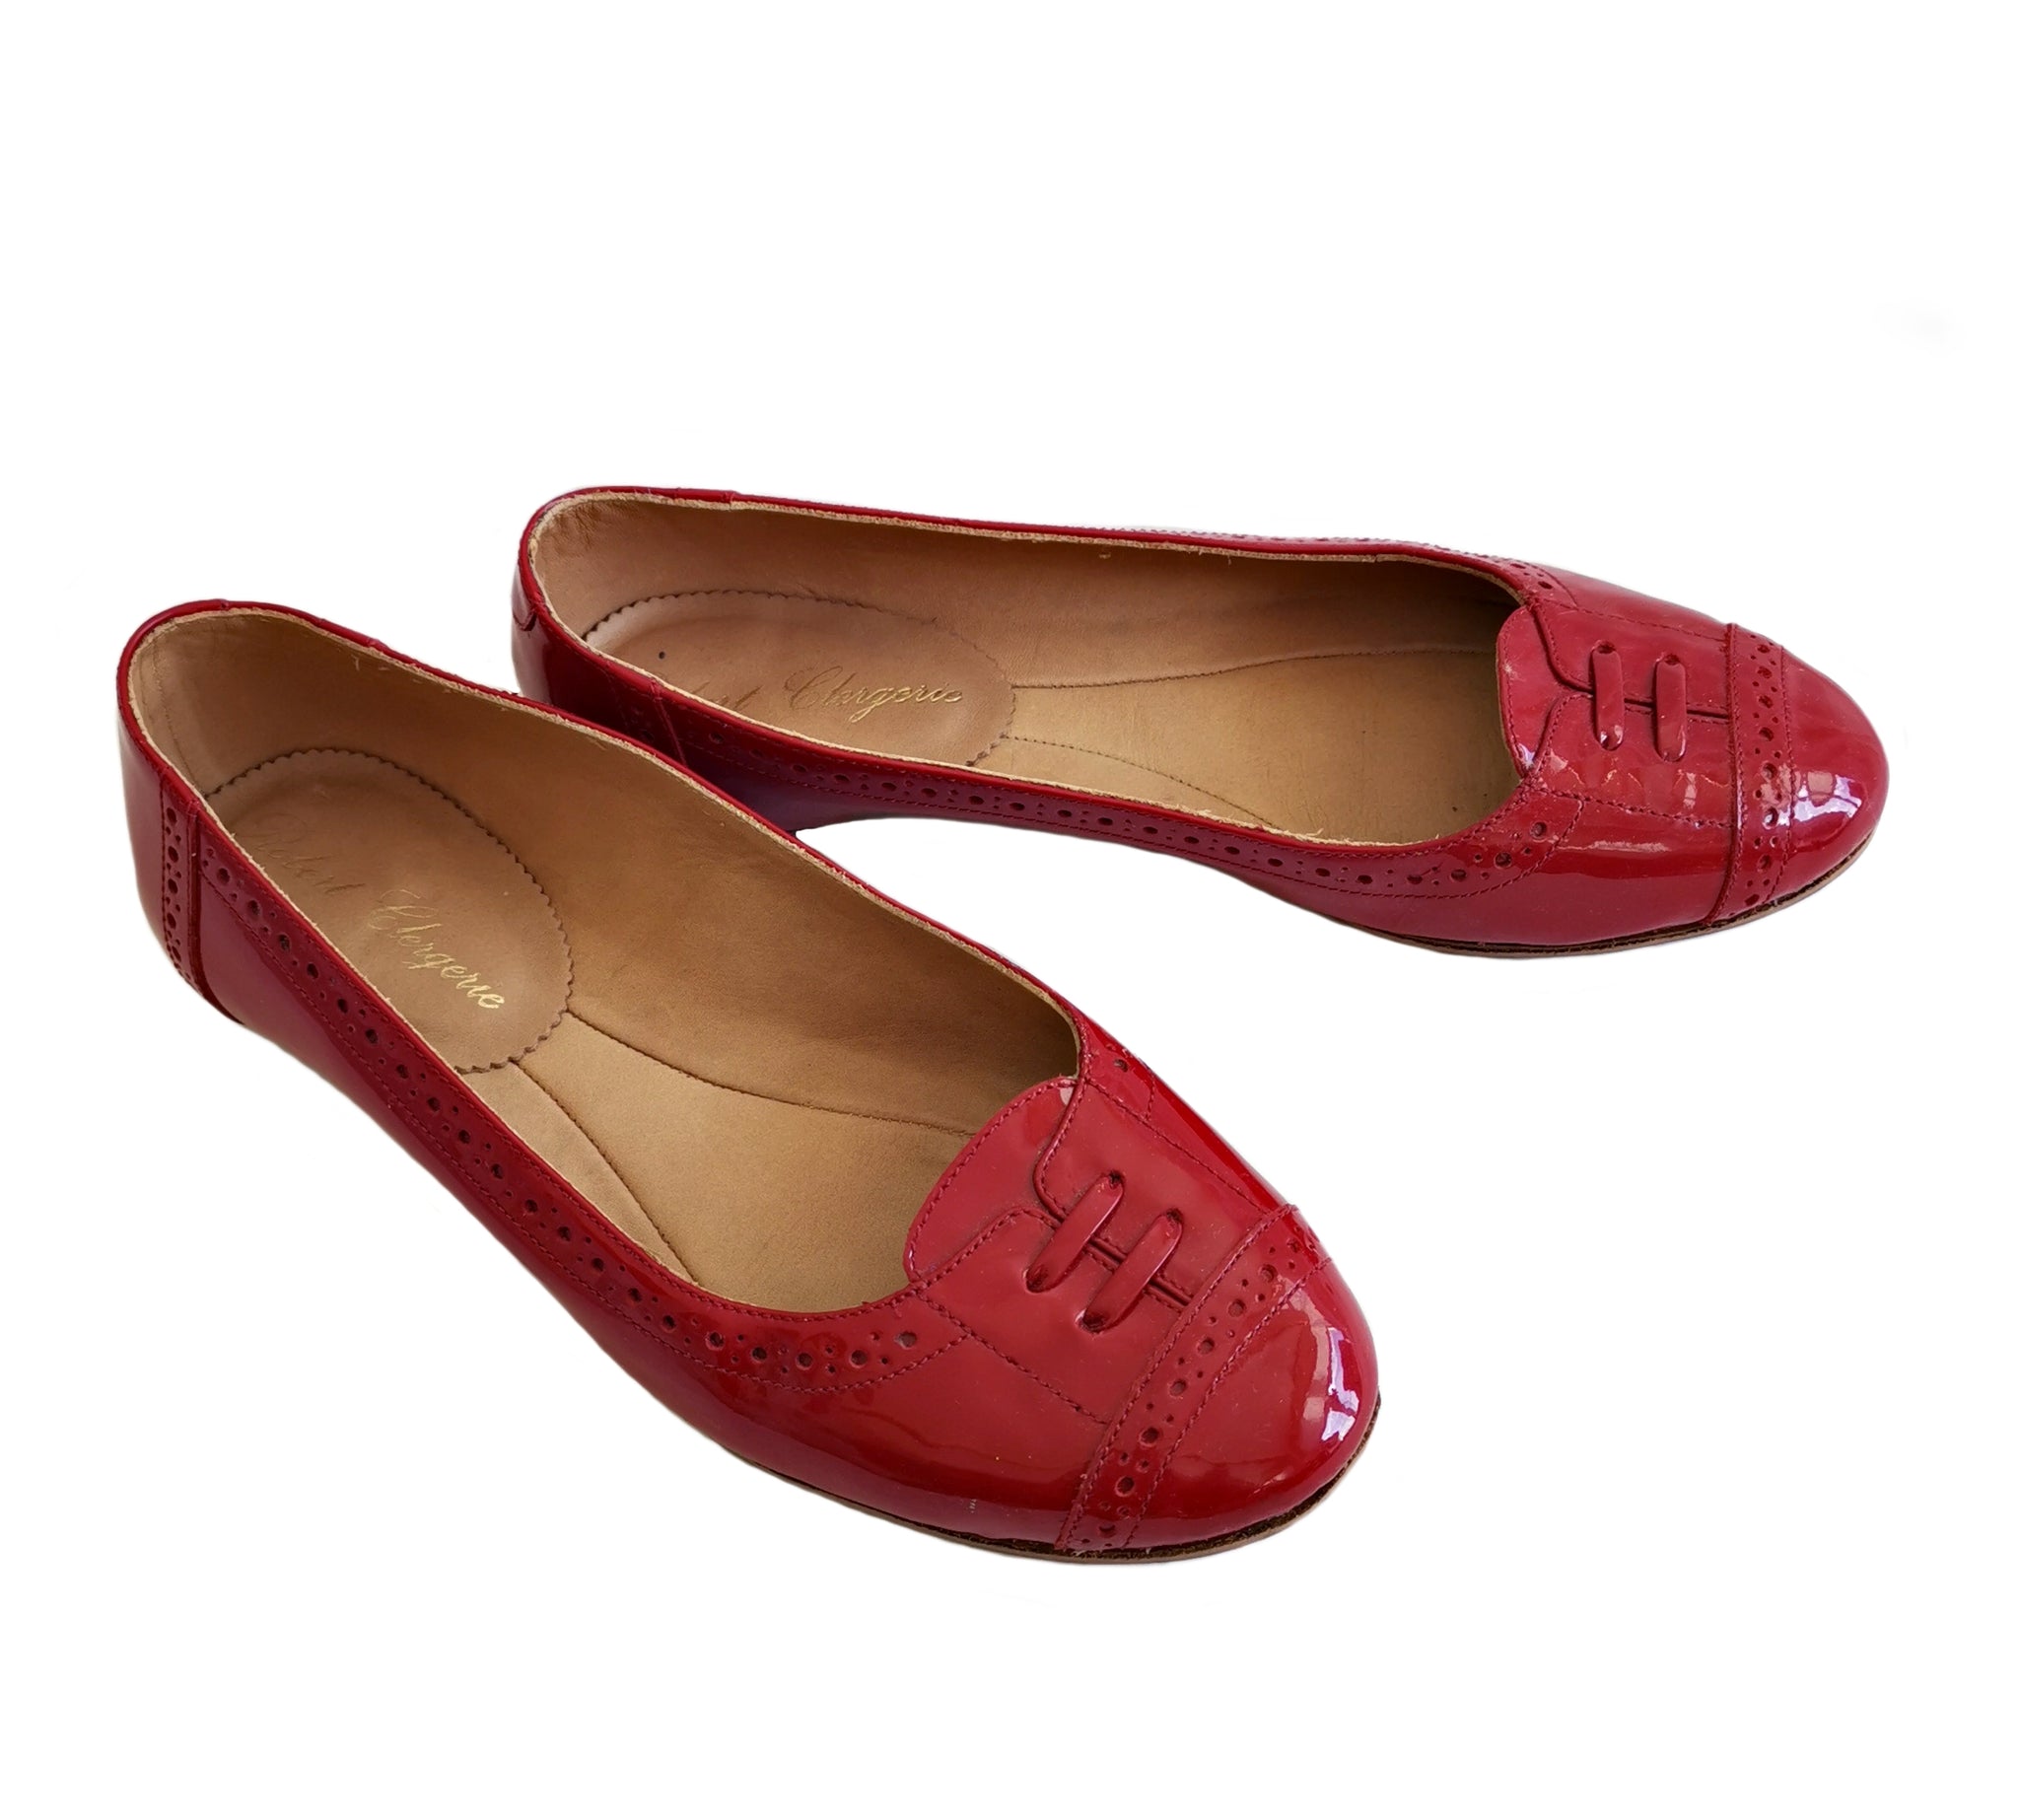 red patent leather flat shoes